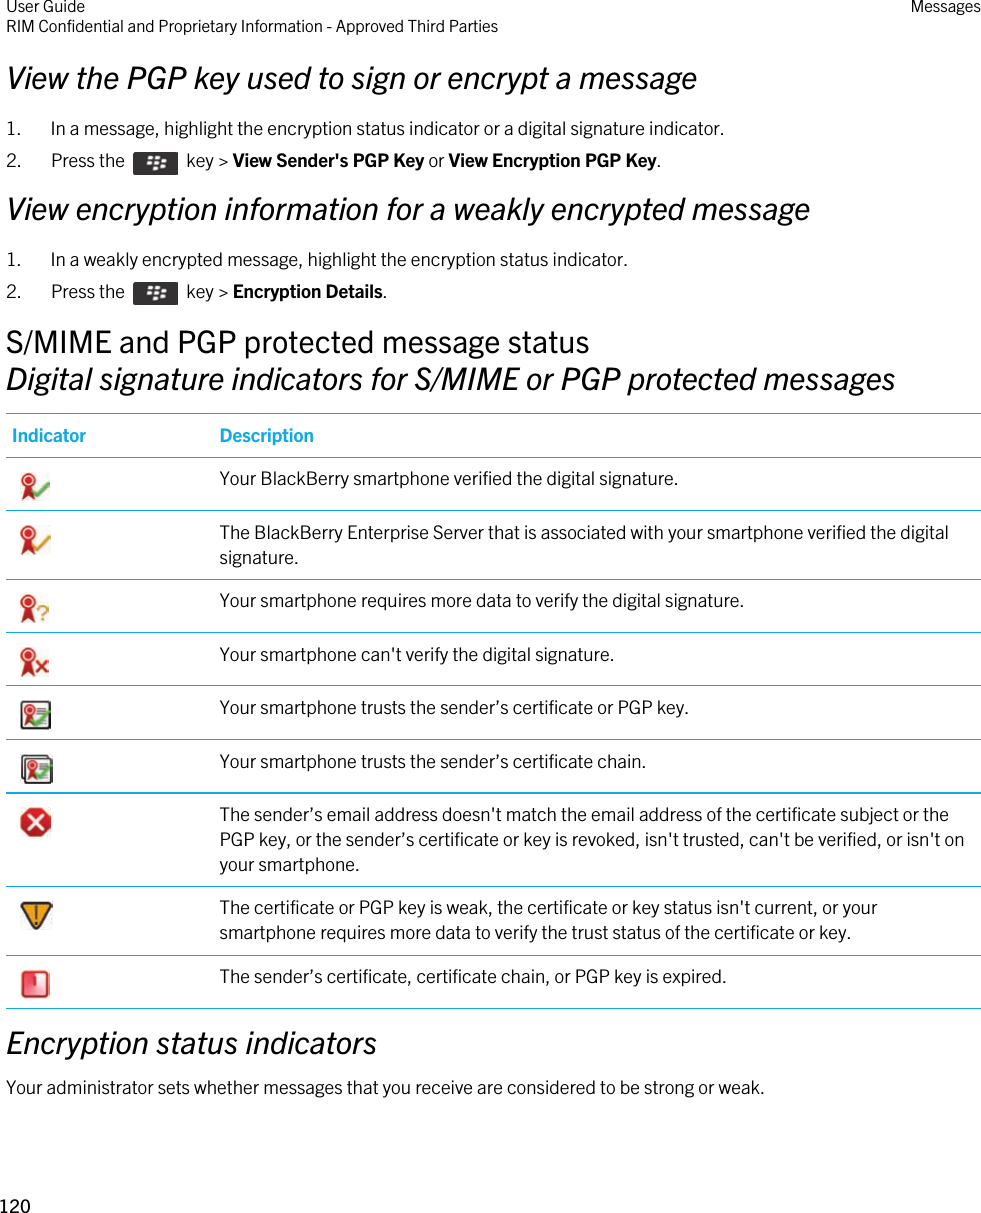 View the PGP key used to sign or encrypt a message1. In a message, highlight the encryption status indicator or a digital signature indicator.2.  Press the    key &gt; View Sender&apos;s PGP Key or View Encryption PGP Key. View encryption information for a weakly encrypted message1. In a weakly encrypted message, highlight the encryption status indicator.2.  Press the    key &gt; Encryption Details. S/MIME and PGP protected message statusDigital signature indicators for S/MIME or PGP protected messagesIndicator Description Your BlackBerry smartphone verified the digital signature. The BlackBerry Enterprise Server that is associated with your smartphone verified the digital signature. Your smartphone requires more data to verify the digital signature. Your smartphone can&apos;t verify the digital signature. Your smartphone trusts the sender’s certificate or PGP key. Your smartphone trusts the sender’s certificate chain. The sender’s email address doesn&apos;t match the email address of the certificate subject or the PGP key, or the sender’s certificate or key is revoked, isn&apos;t trusted, can&apos;t be verified, or isn&apos;t on your smartphone. The certificate or PGP key is weak, the certificate or key status isn&apos;t current, or your smartphone requires more data to verify the trust status of the certificate or key. The sender’s certificate, certificate chain, or PGP key is expired.Encryption status indicatorsYour administrator sets whether messages that you receive are considered to be strong or weak.User GuideRIM Confidential and Proprietary Information - Approved Third Parties Messages120 